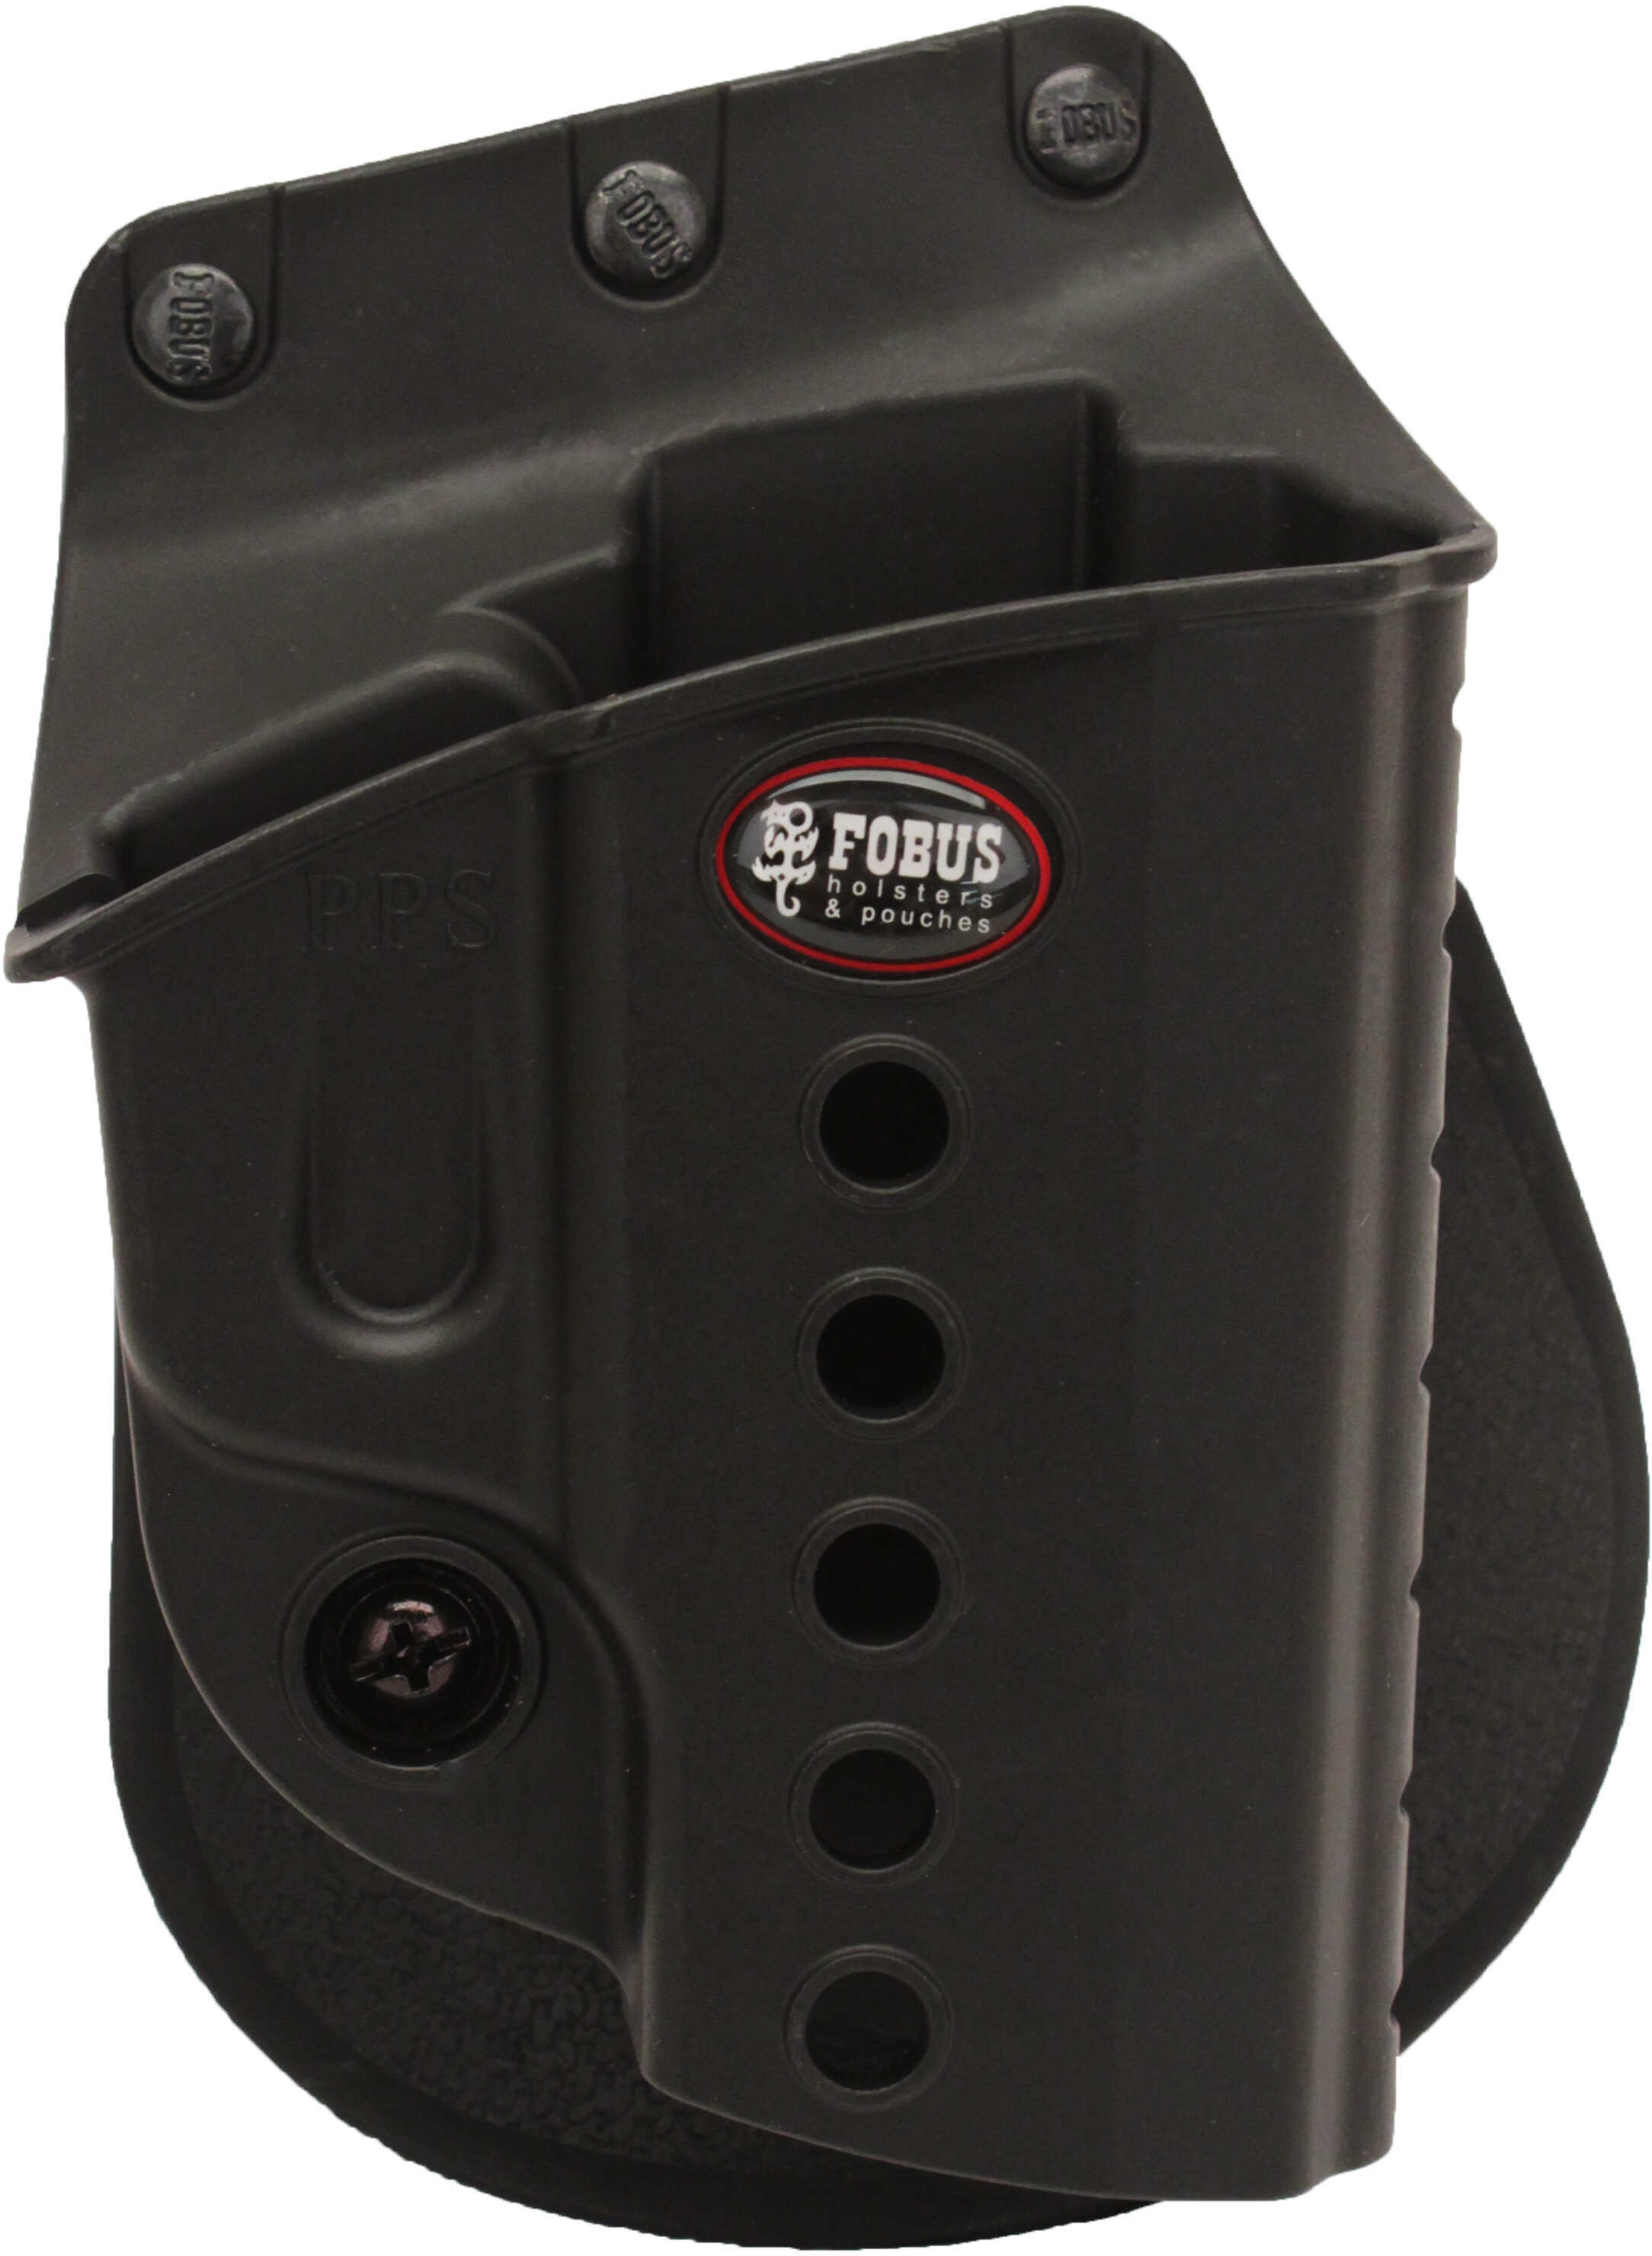 Fobus Evolution Holster Rot-Paddle For S&W M&P Shield/Taurus 708709/Walther Pps Right Hand Black